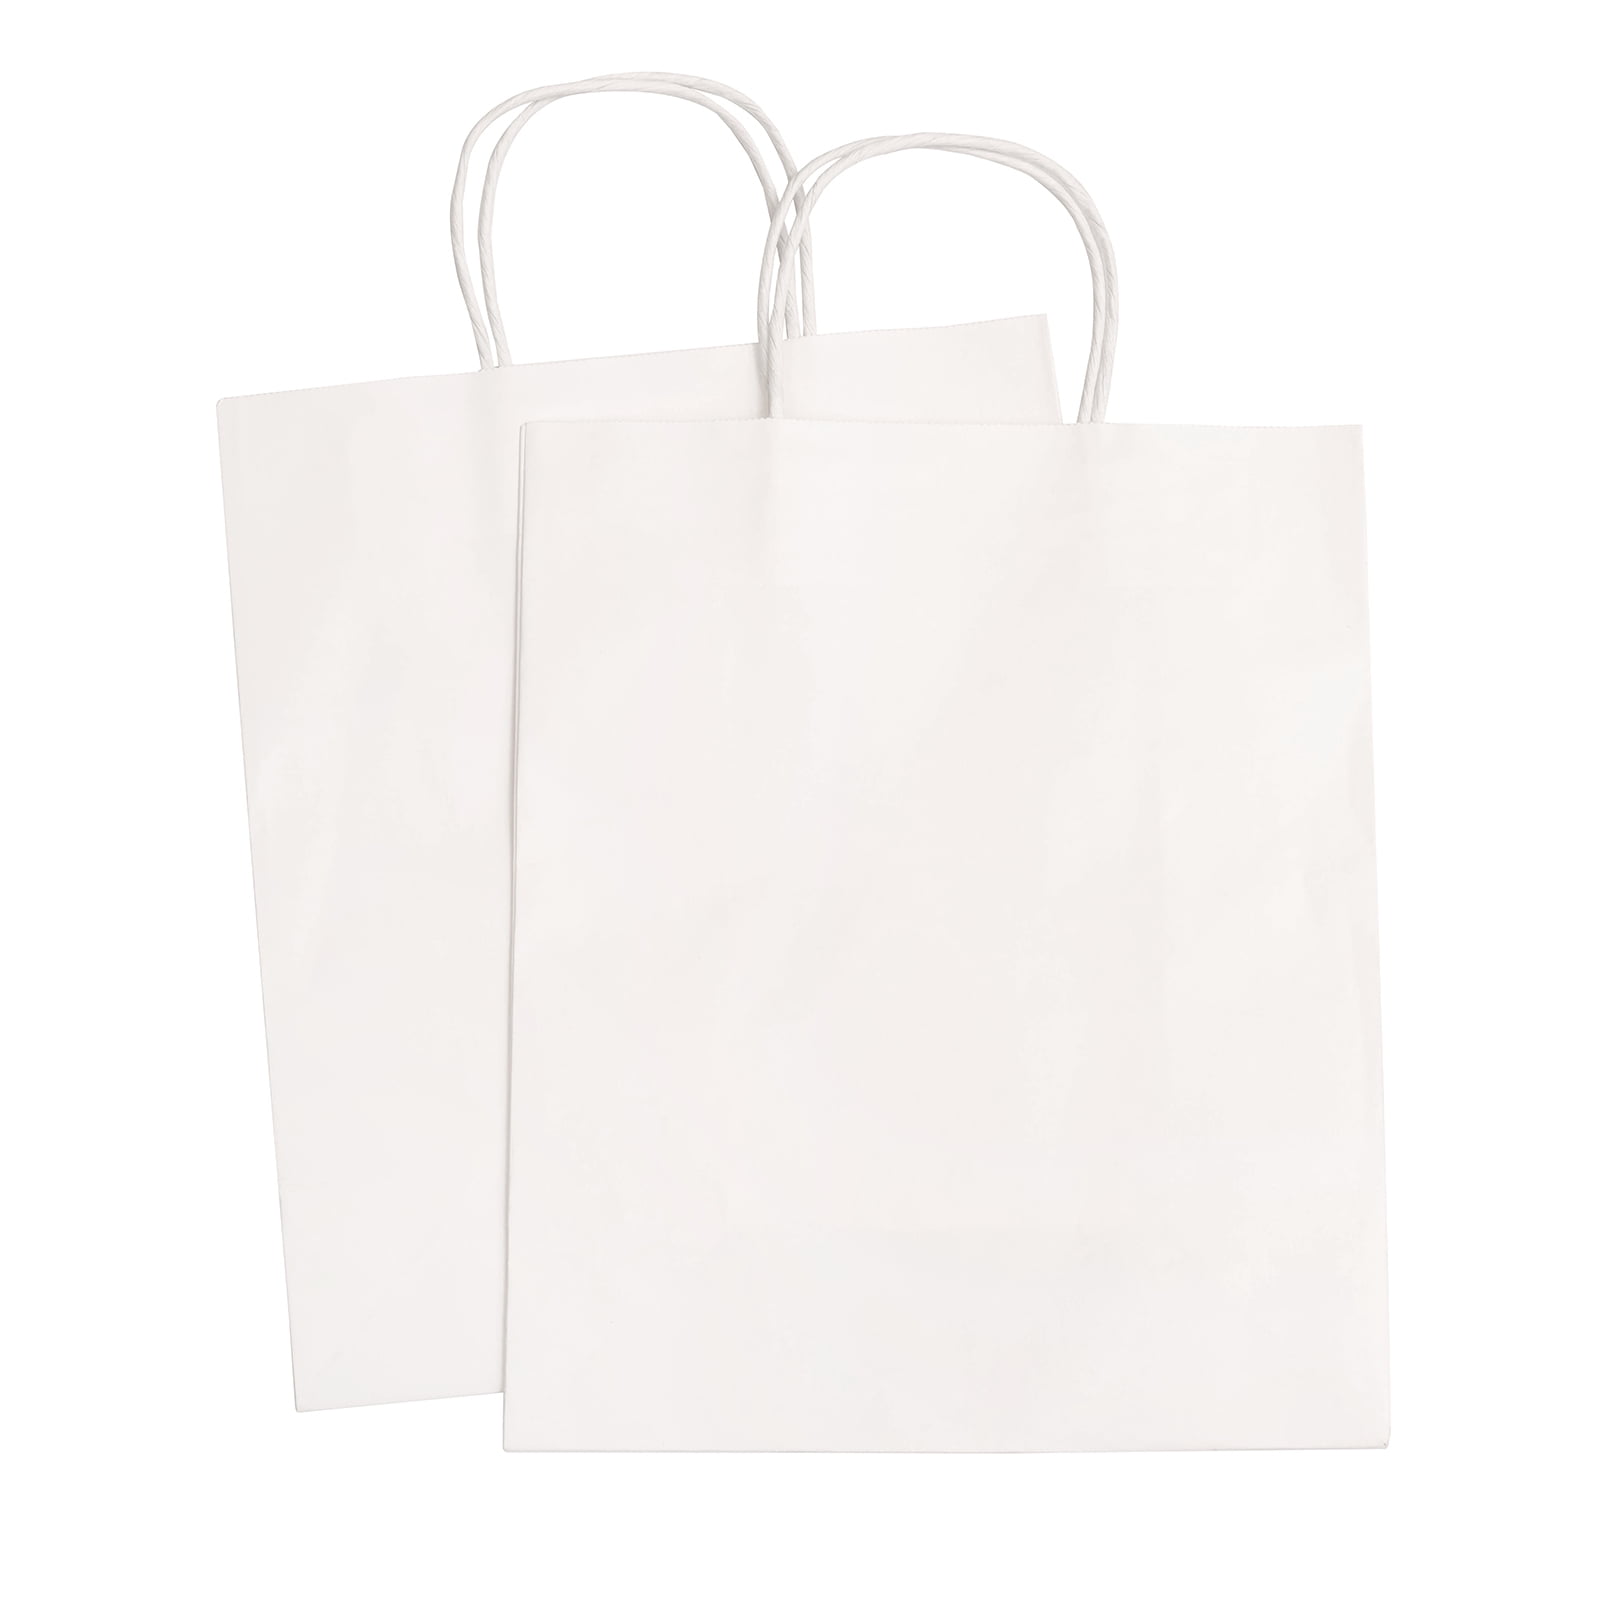 Hello Hobby Large White Paper Bag - 13 Count, Crafting Occasion 